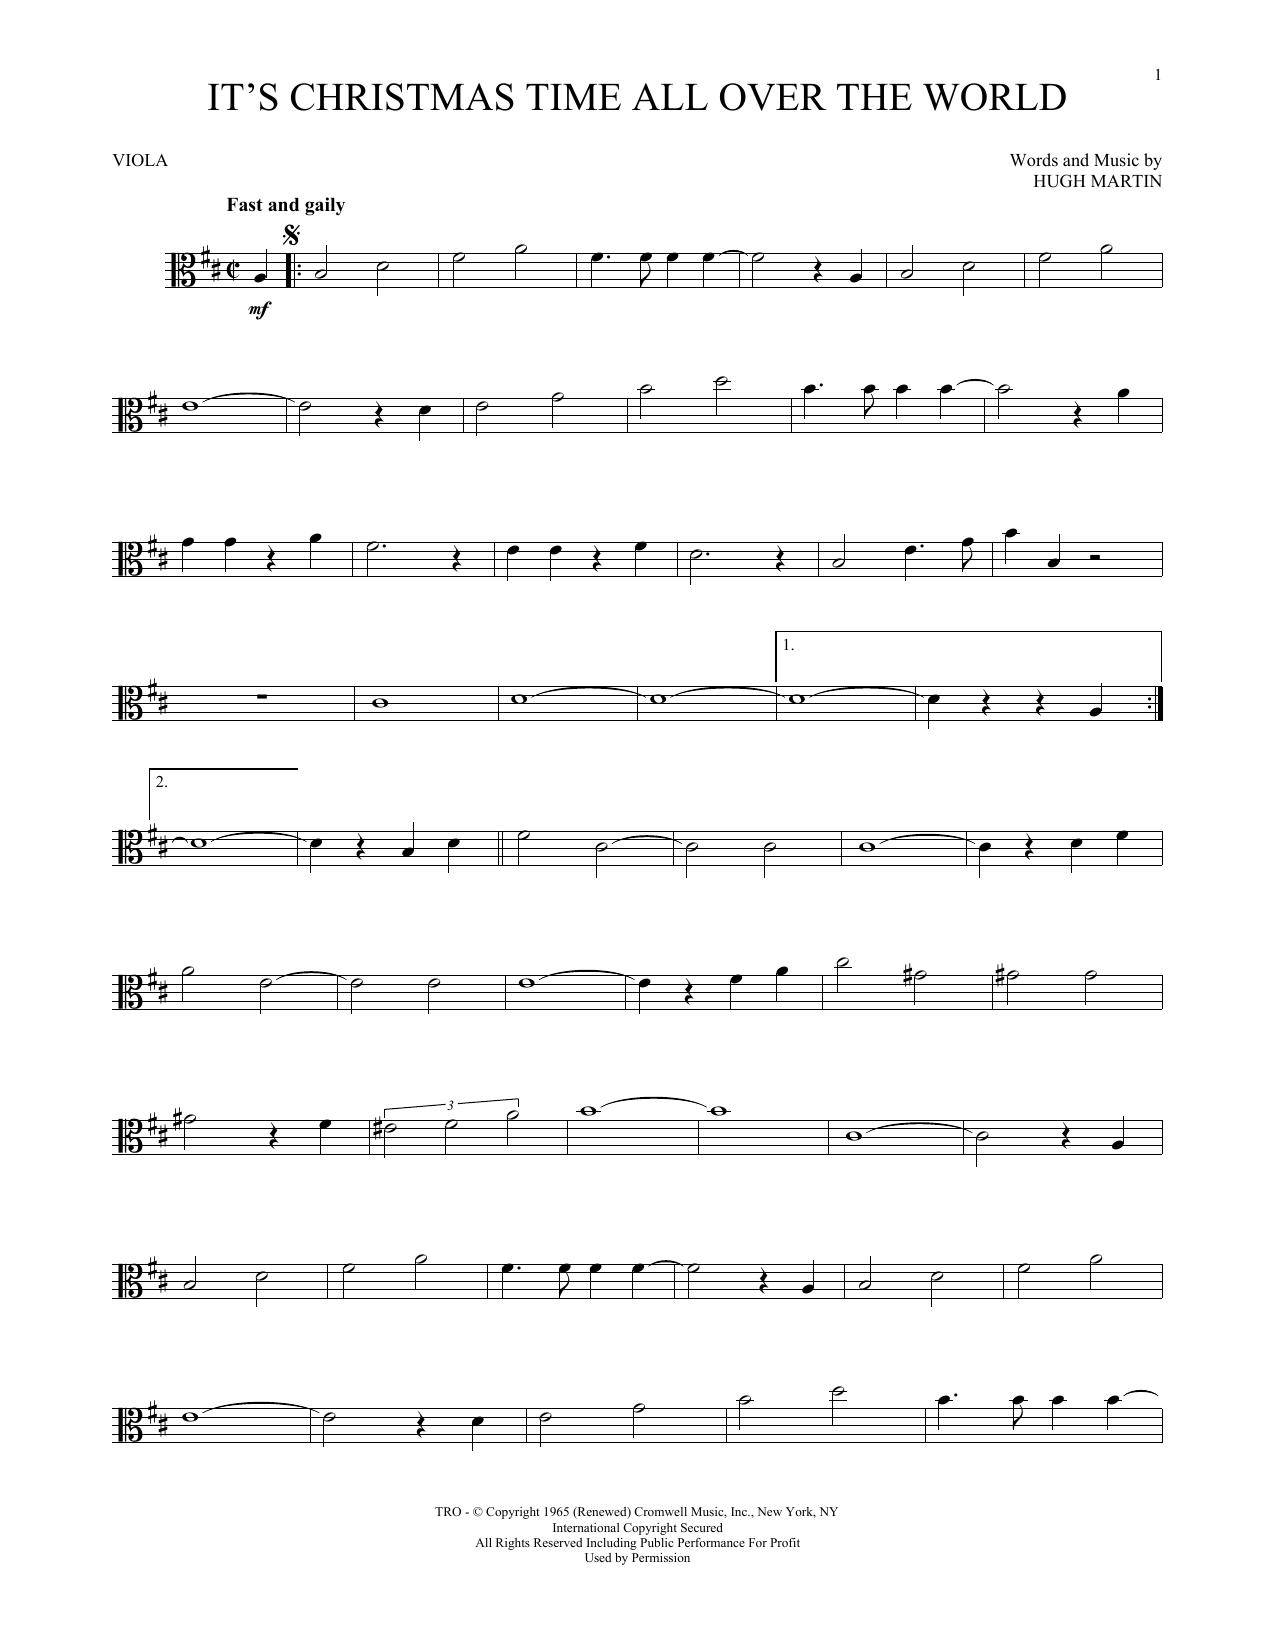 Download Hugh Martin It's Christmas Time All Over The World Sheet Music